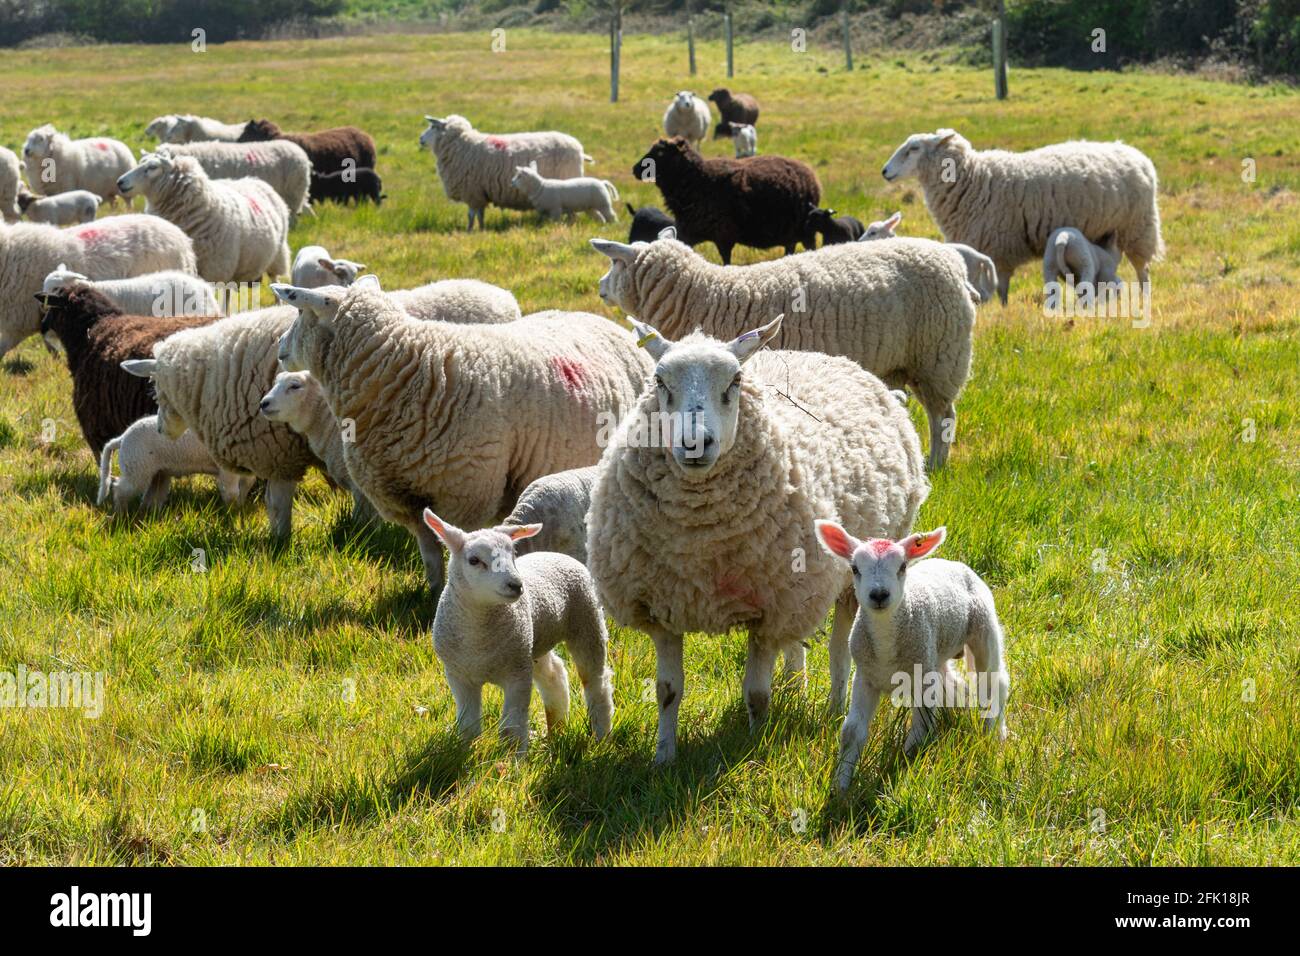 White and black sheep with young lambs in a grass field during spring, UK Stock Photo